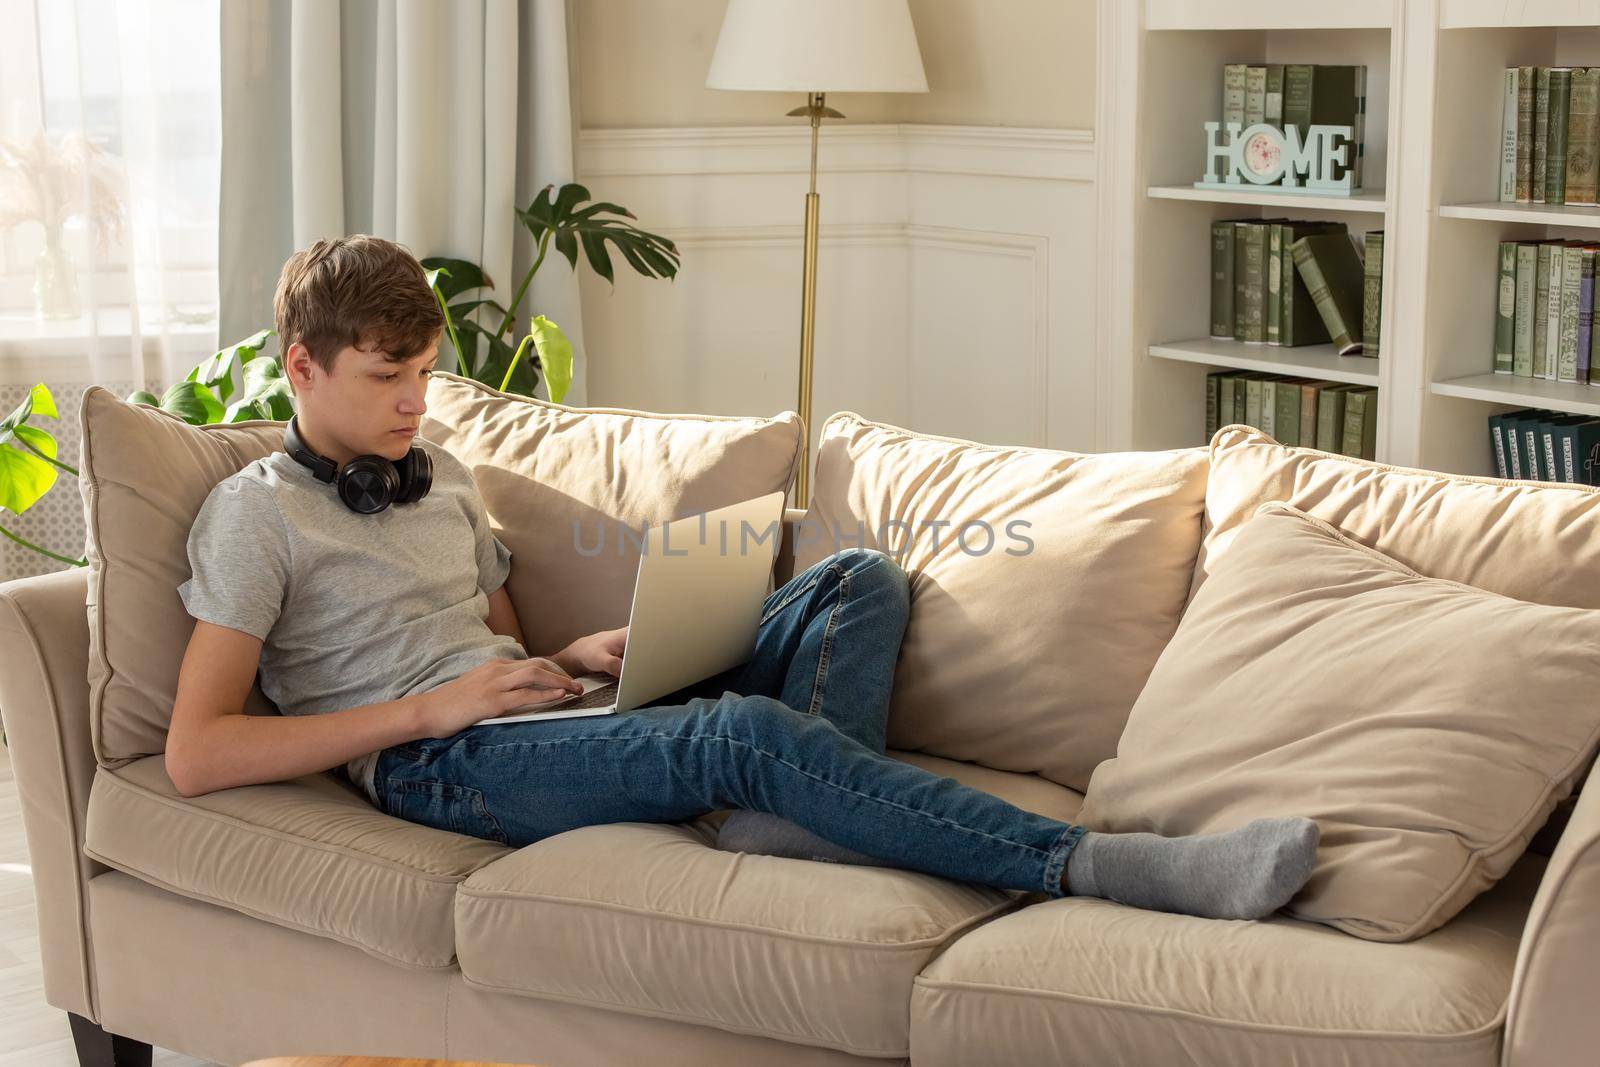 A teenager boy in a gray T-shirt and blue jeans, sits on a beige sofa, in room with plant, wearing black headphones around his neck, looks into a laptop. Copy space